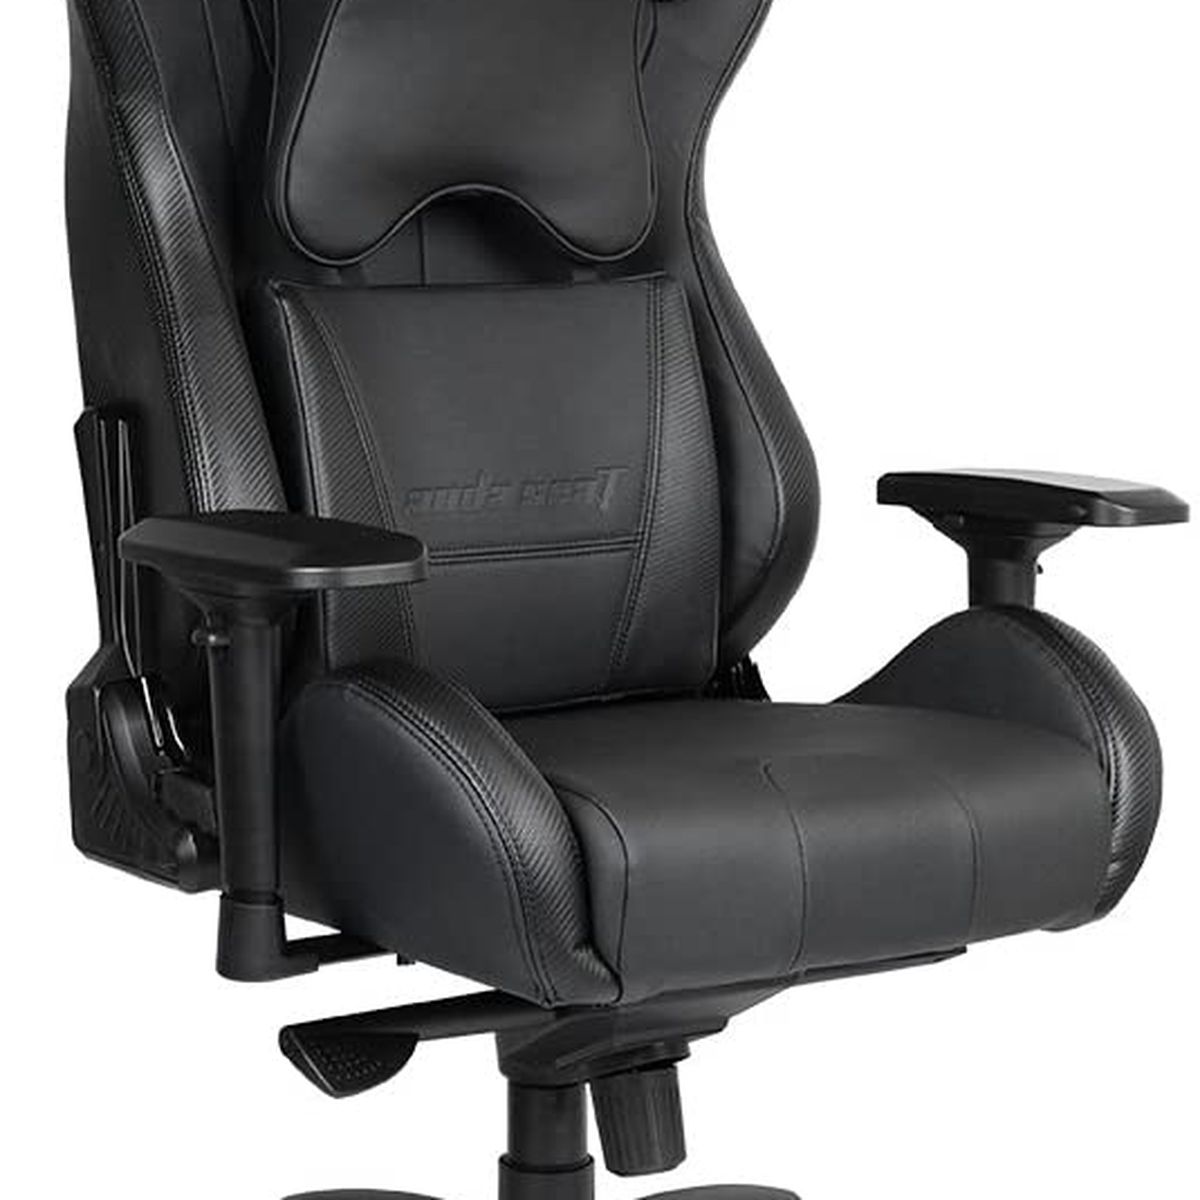 Product shot of the Anda Seat Dark Knight gaming chair